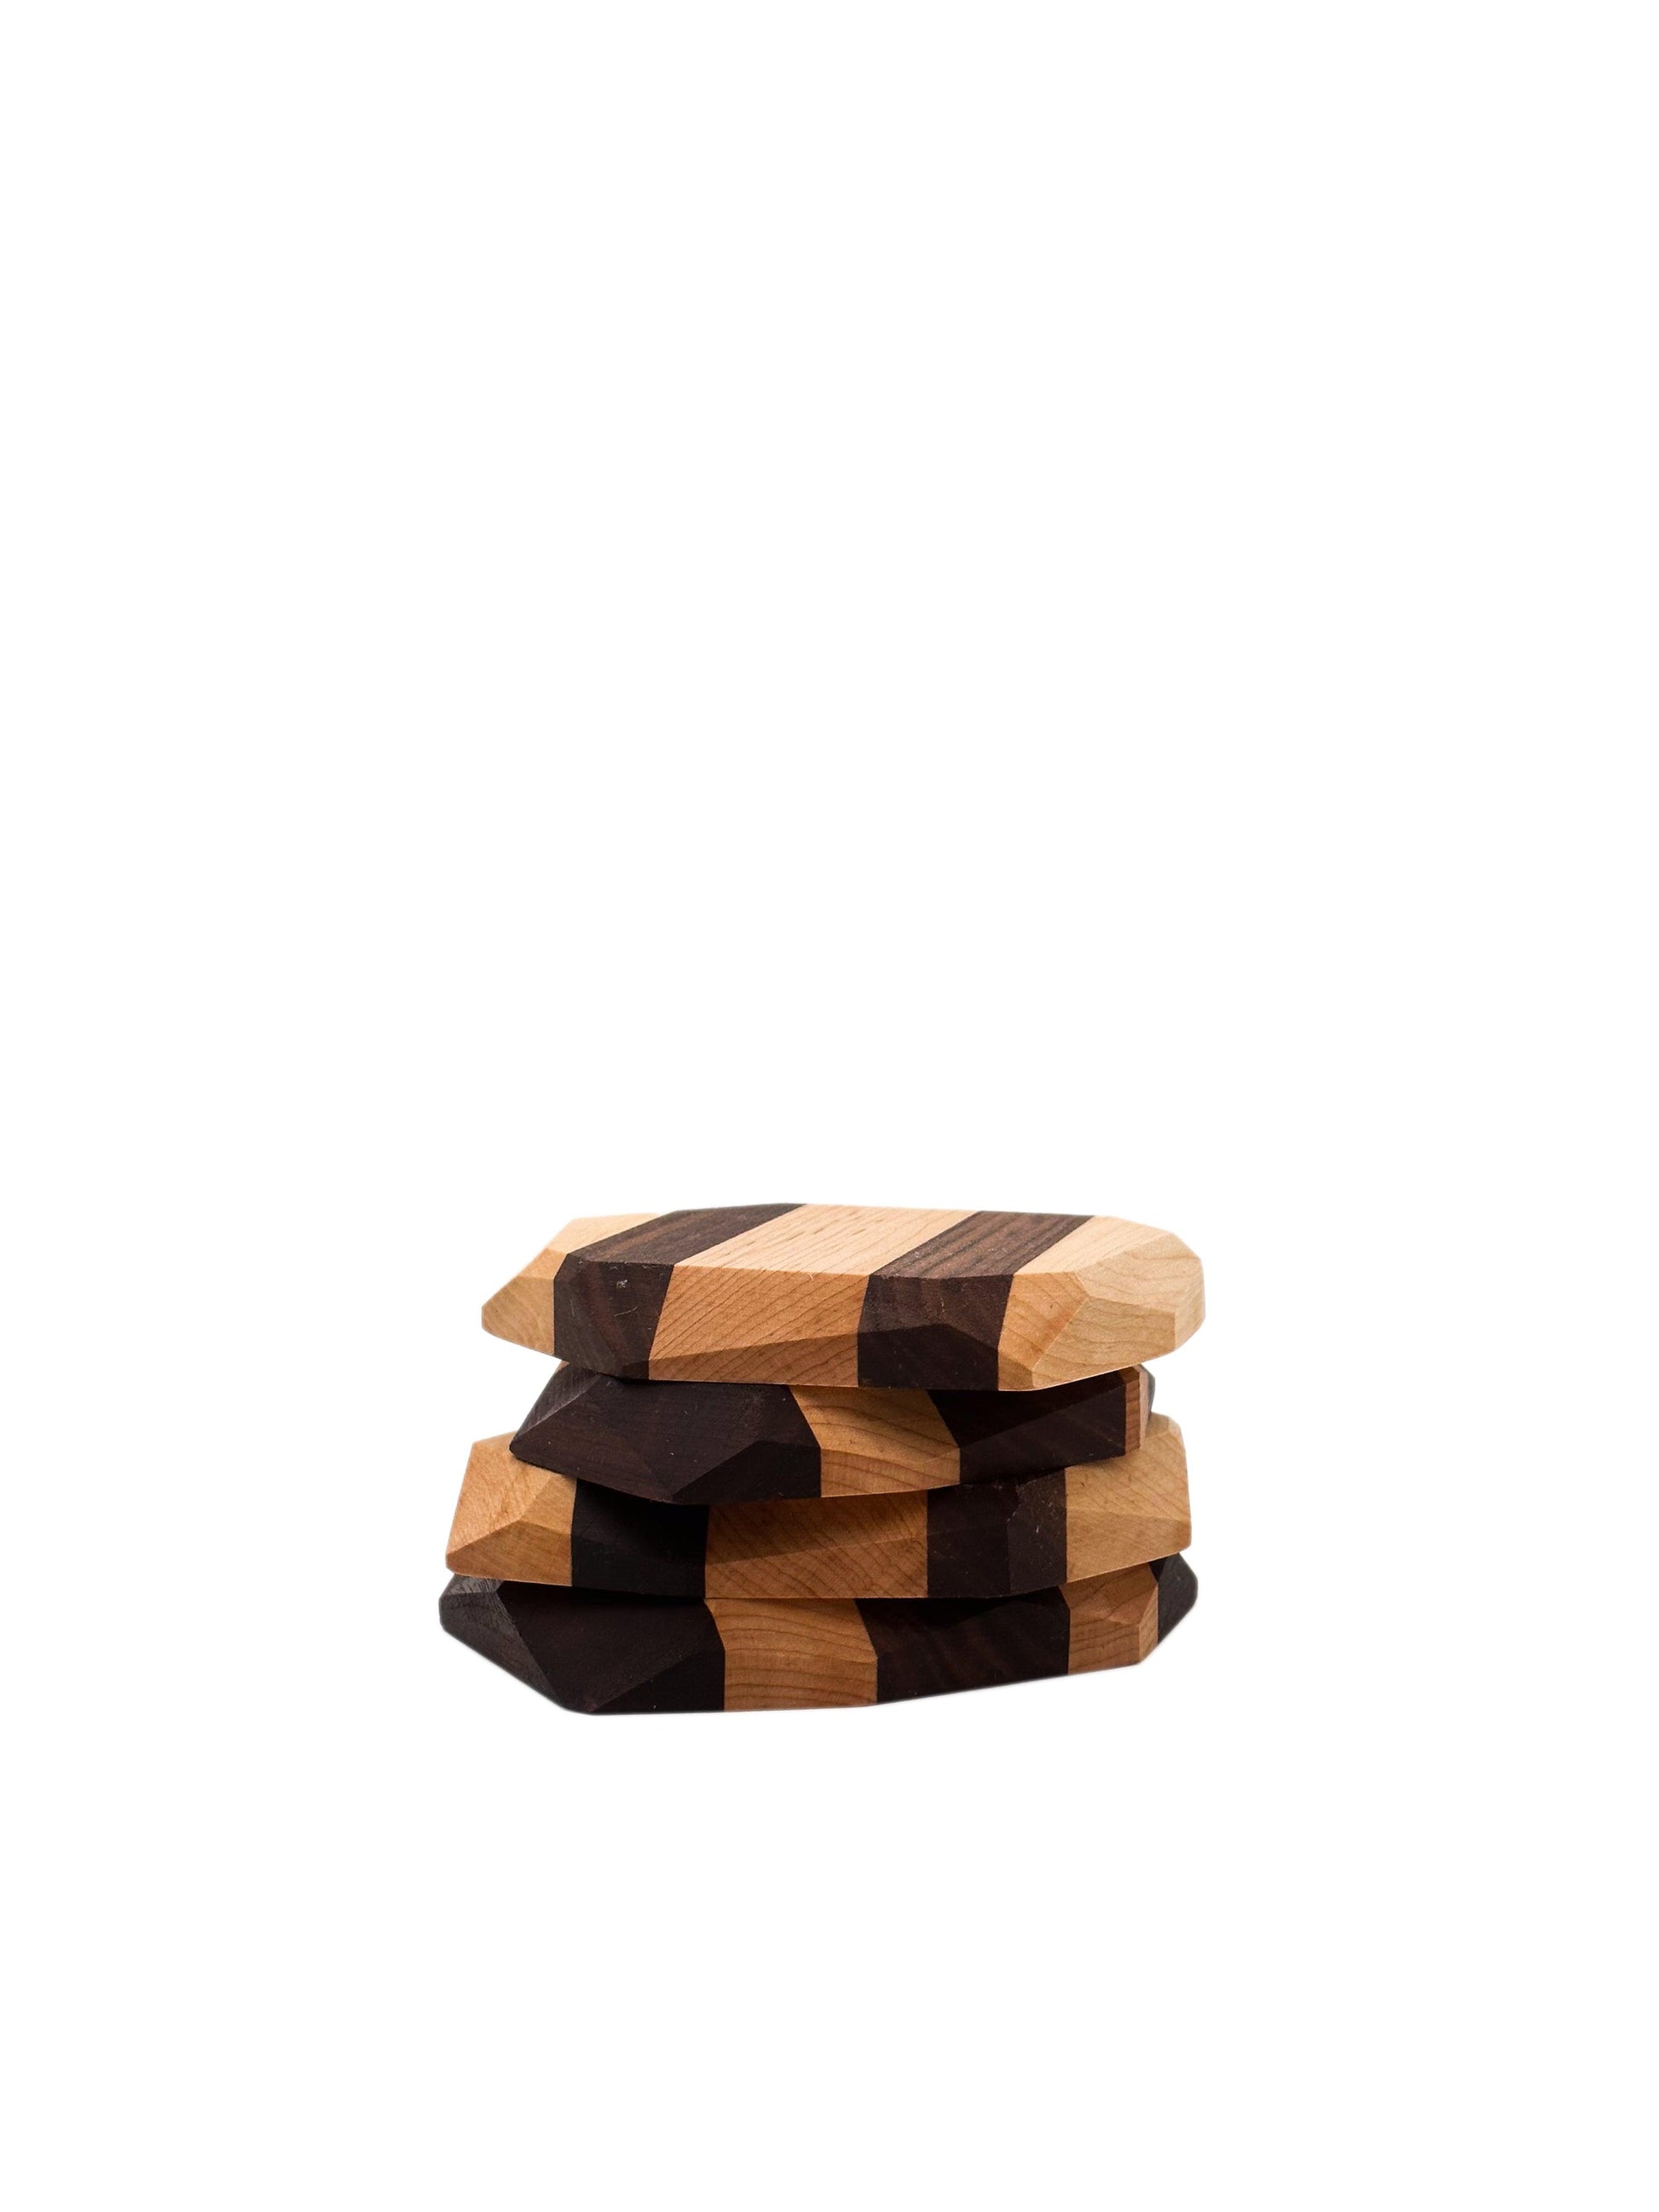 the iron roots designs | wooden geometric coasters | set of 4 - Home Revival Shop